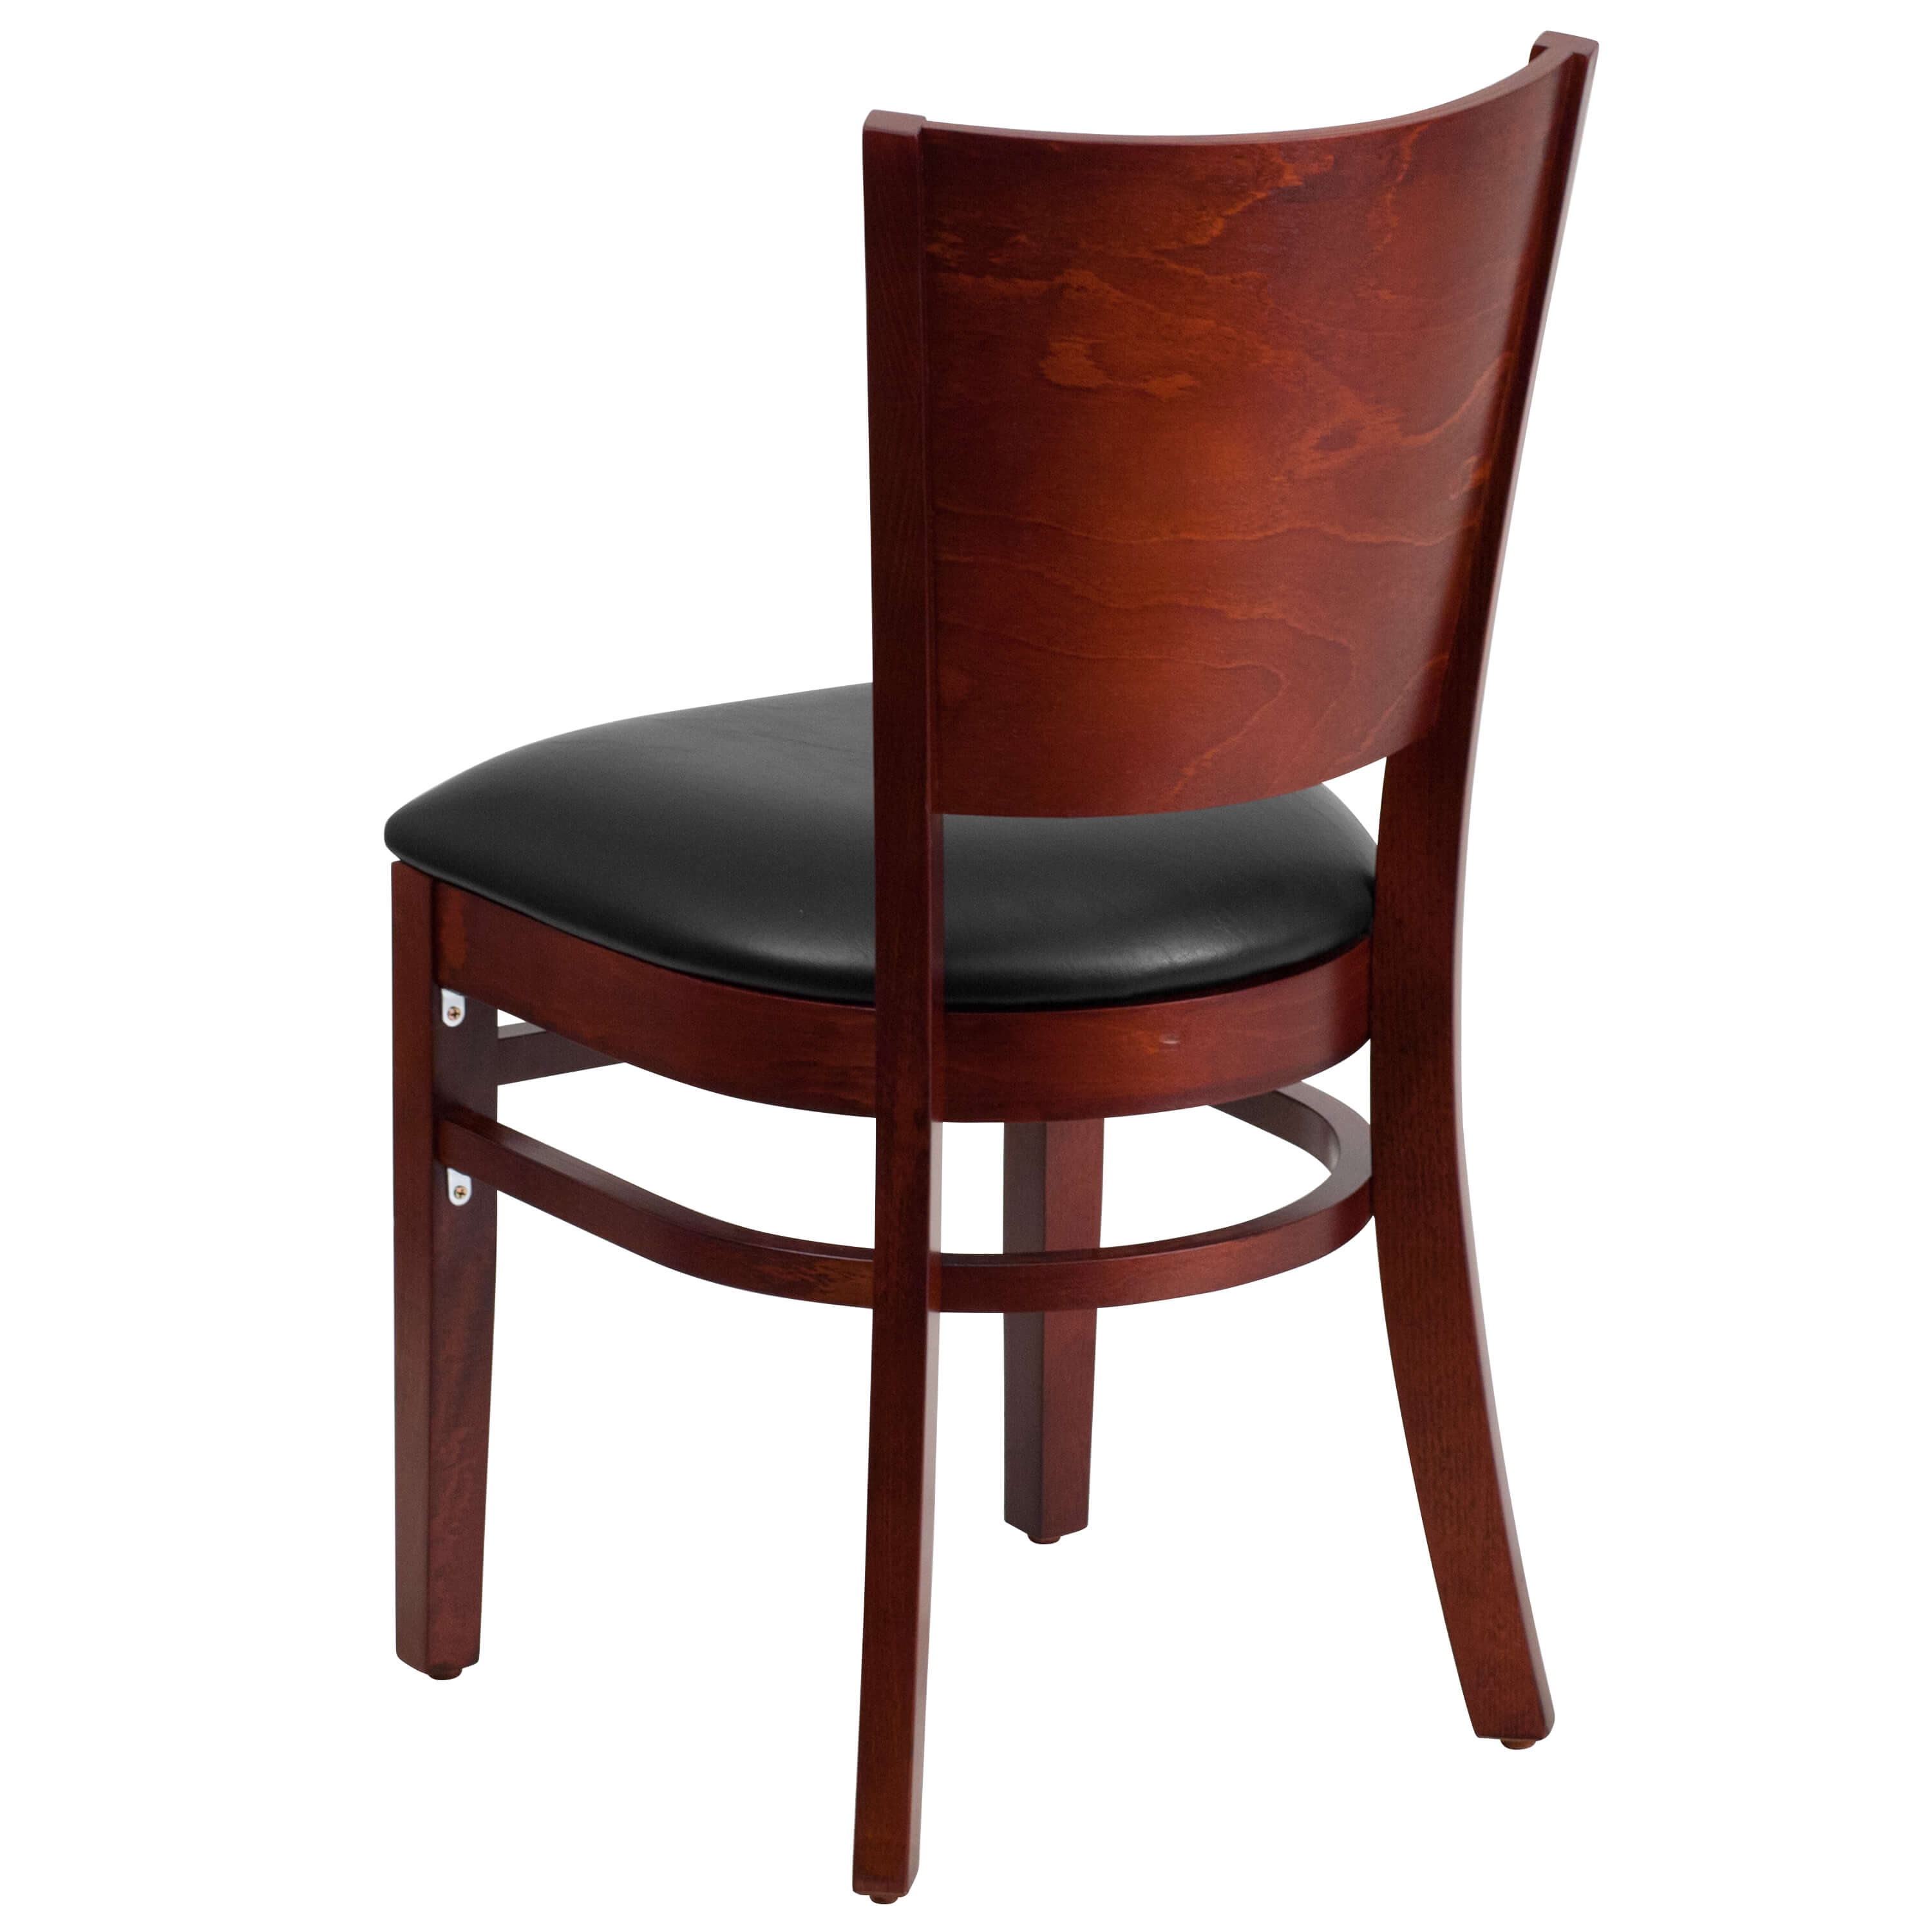 Solid wood dining chairs back view